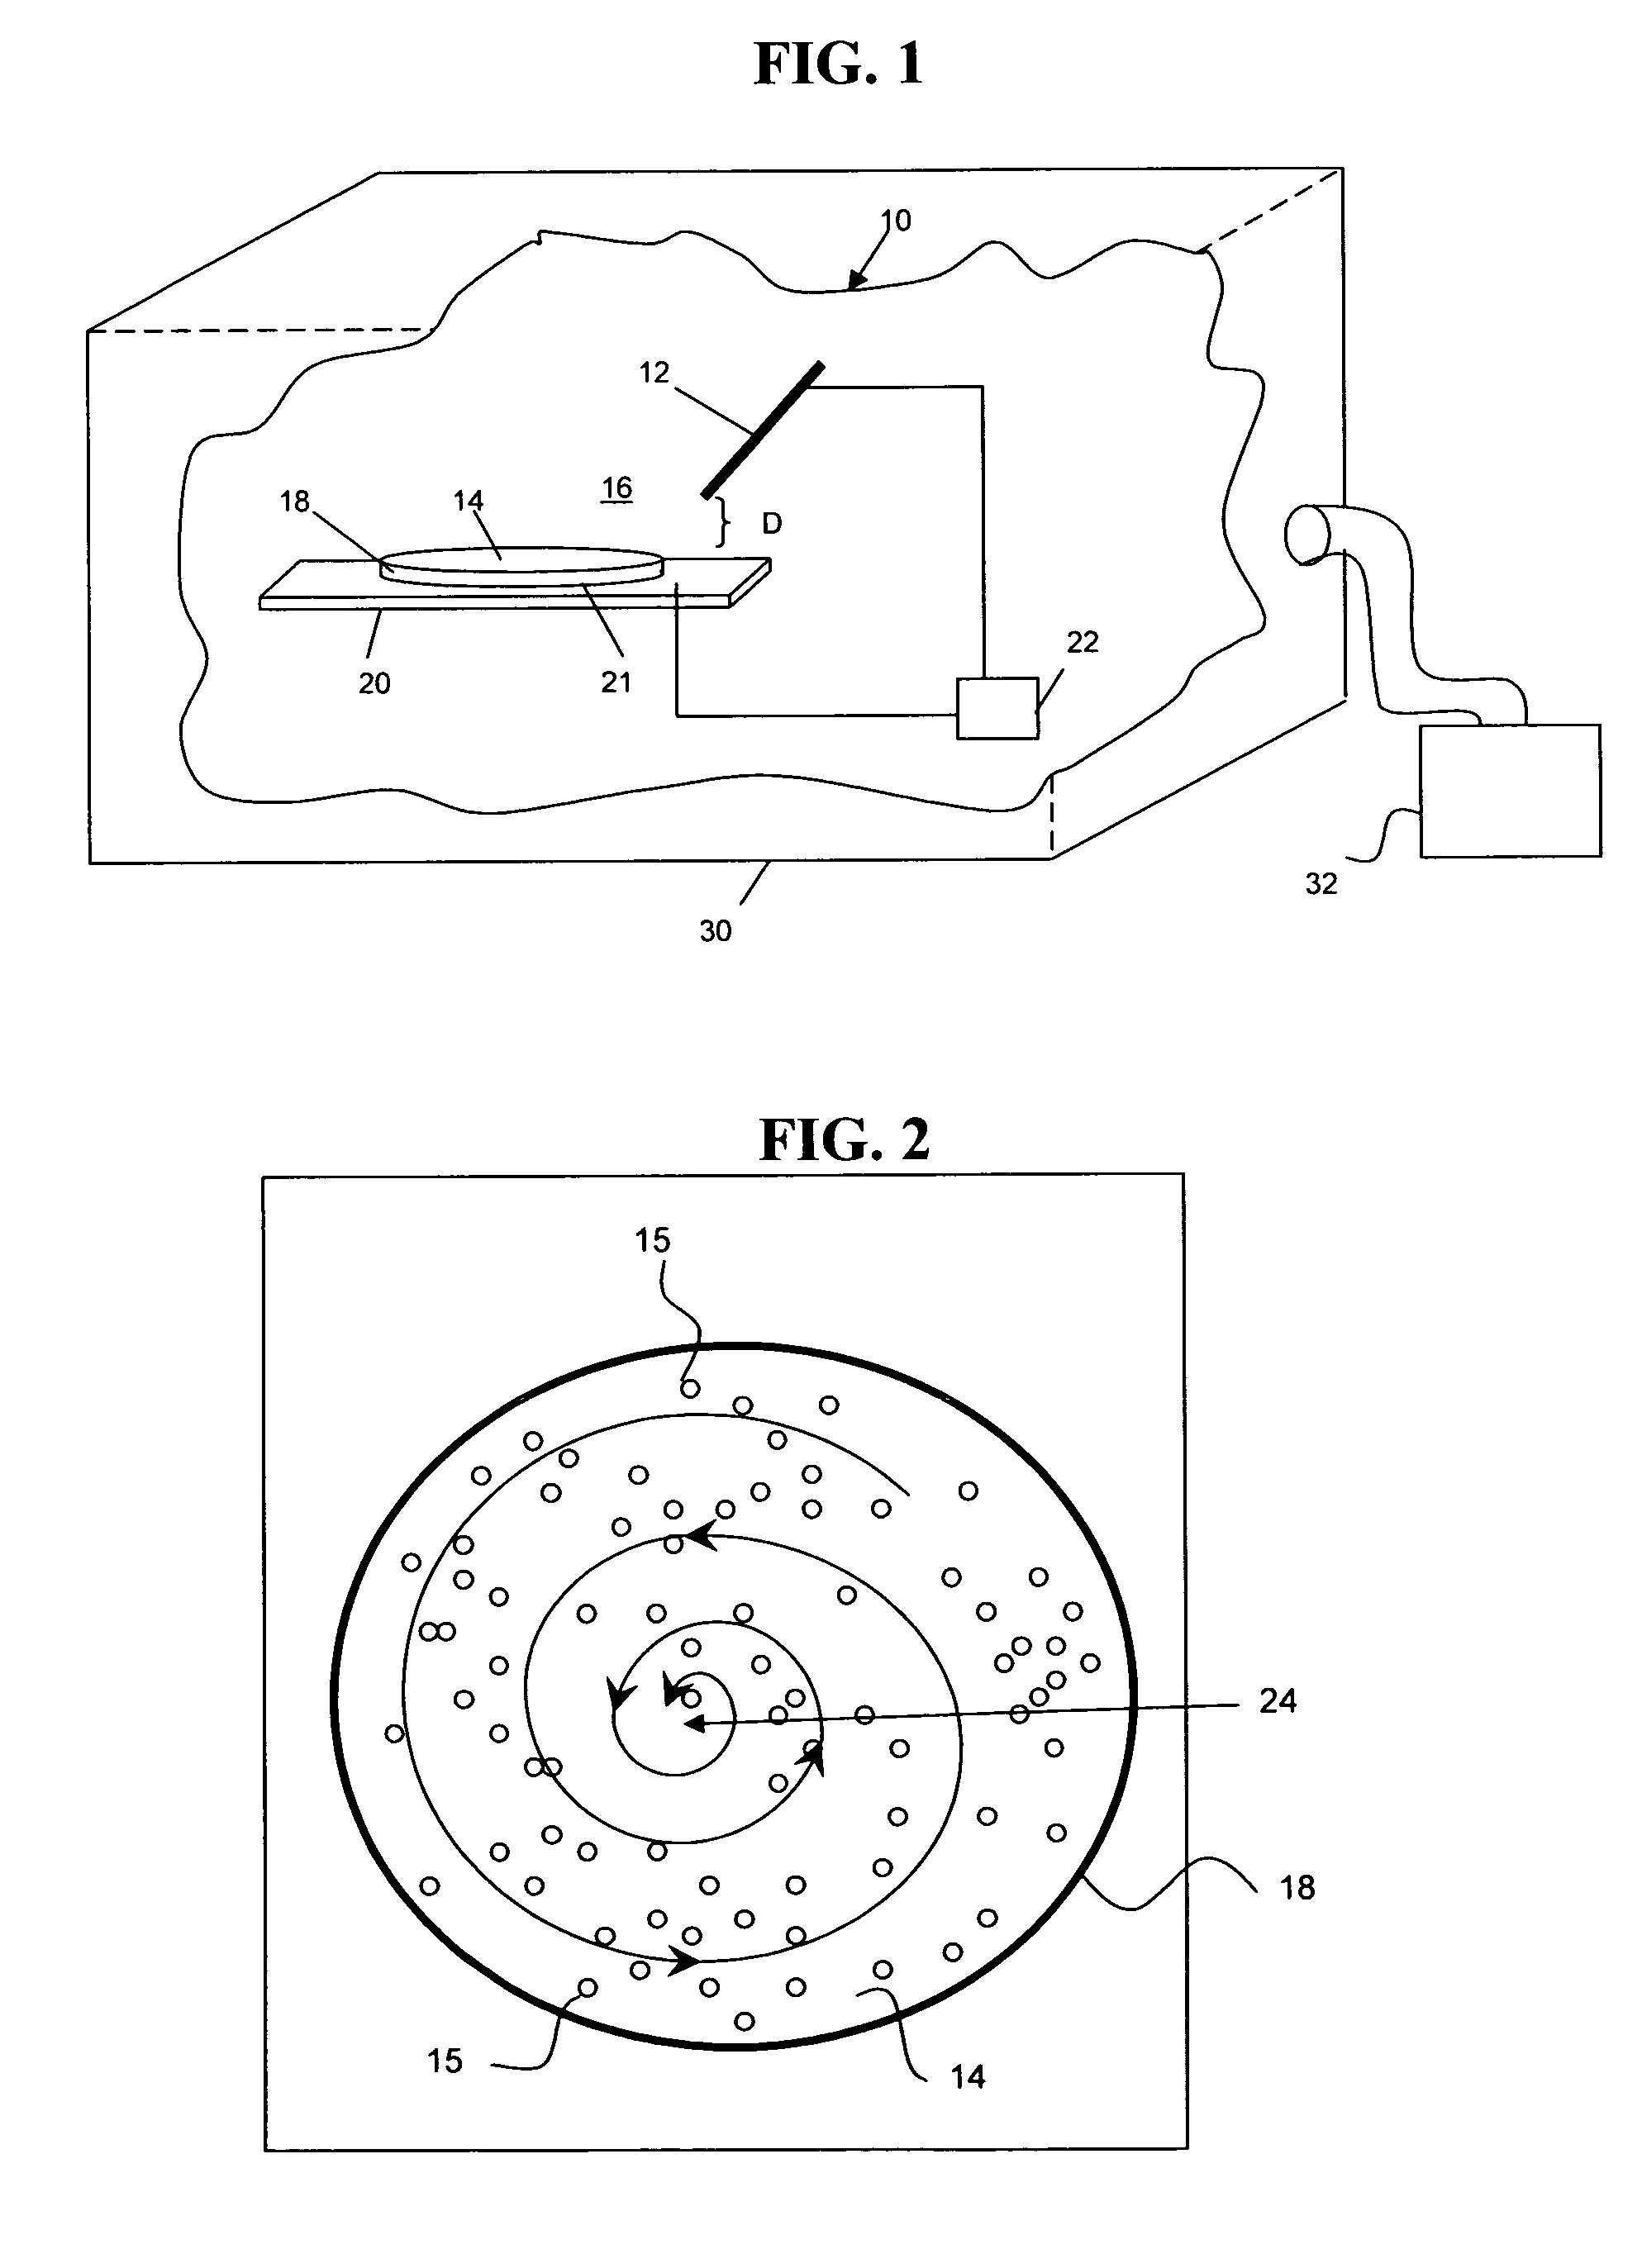 Apparatus and method for non-contact microfluidic sample manipulation